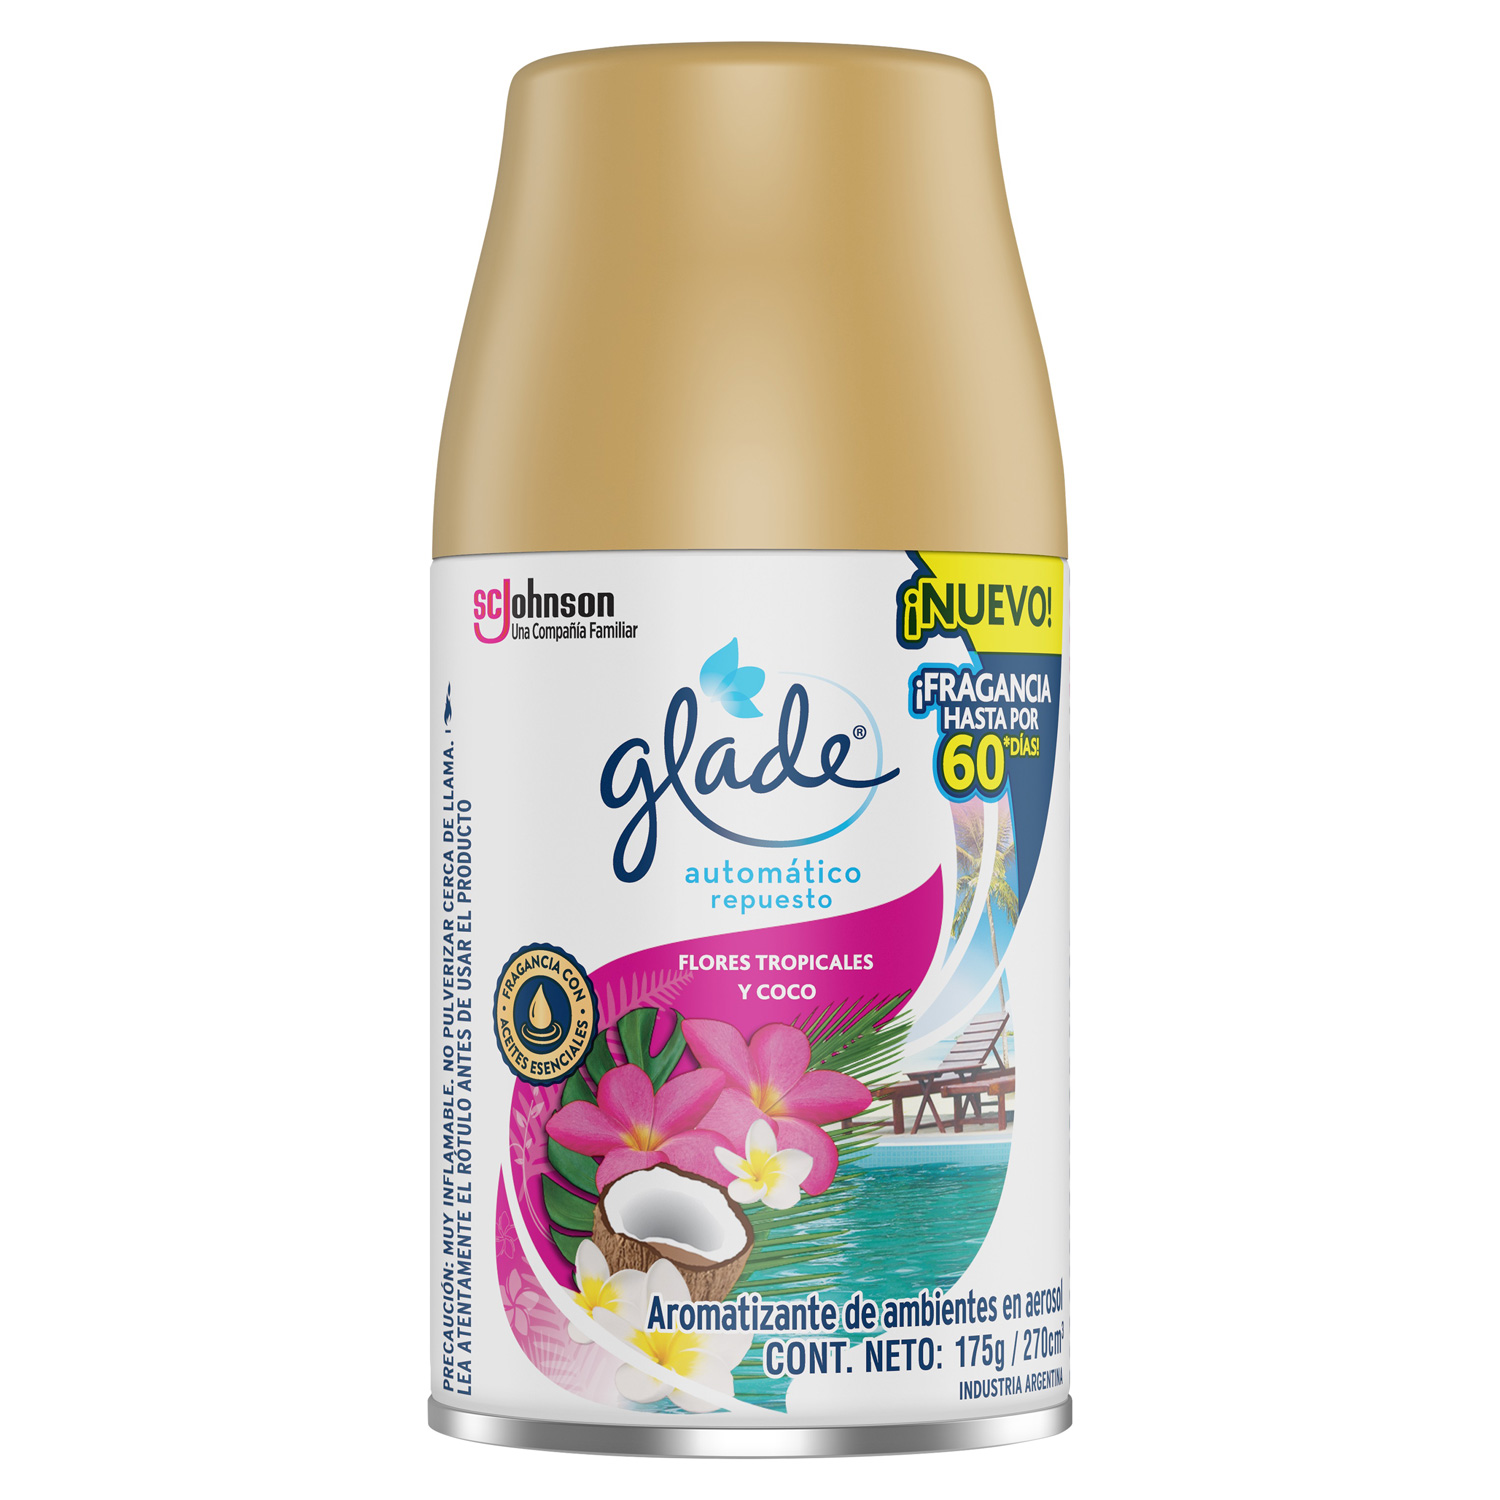 Glade® Automatico Tropical Floral